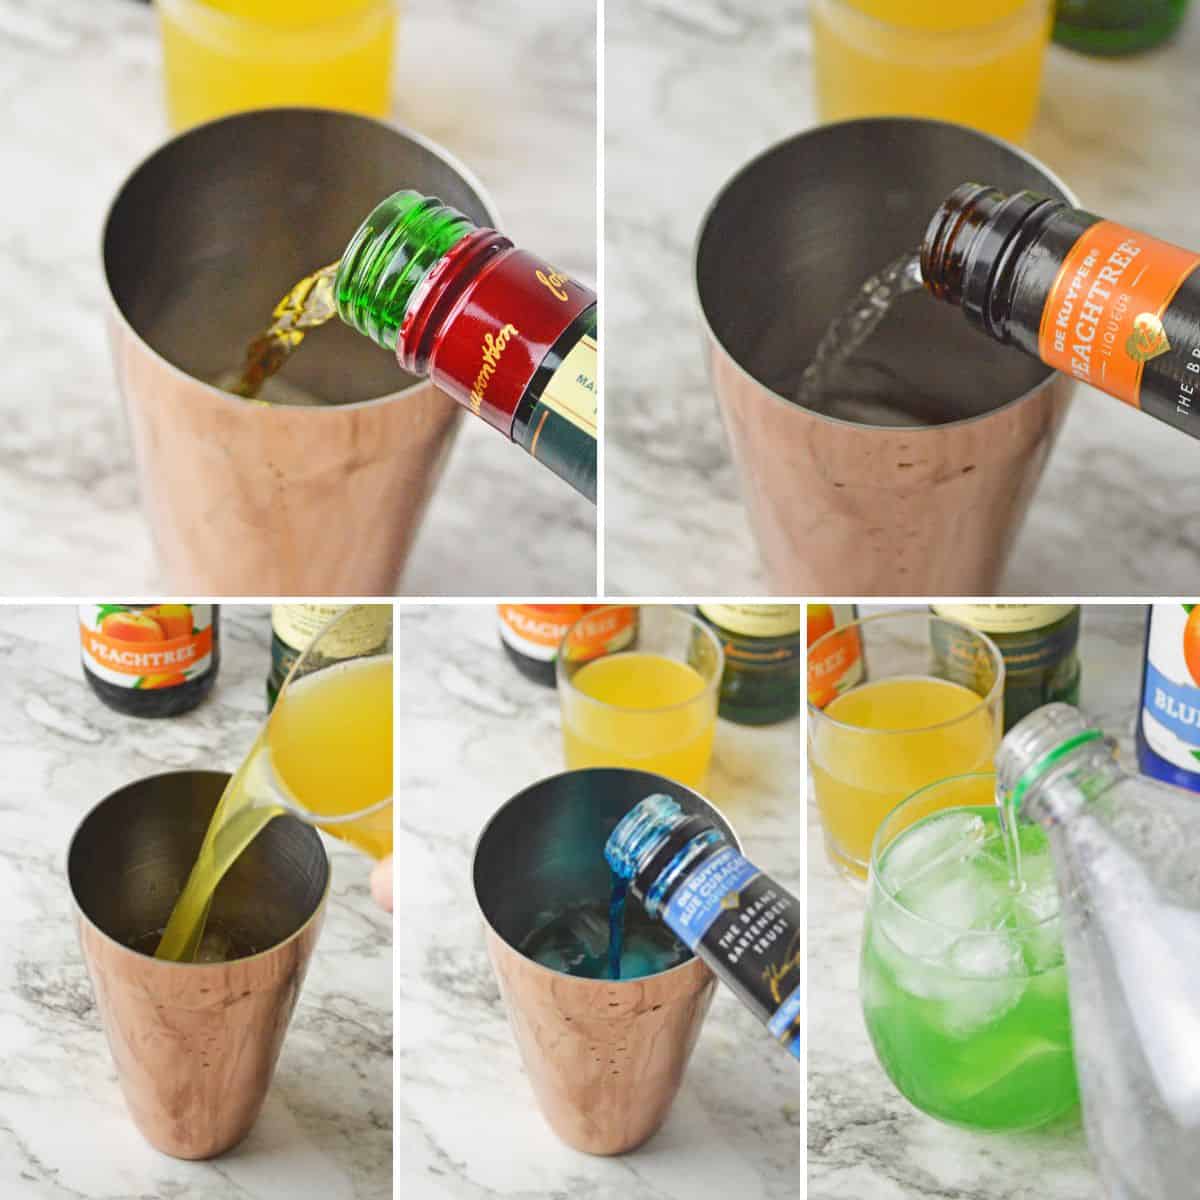 Collage of images of Jameson, peach schnapps, pineapple juice, and blue curacao being poured into cocktail shaker, and Sprite being poured into green cocktail in a glass.